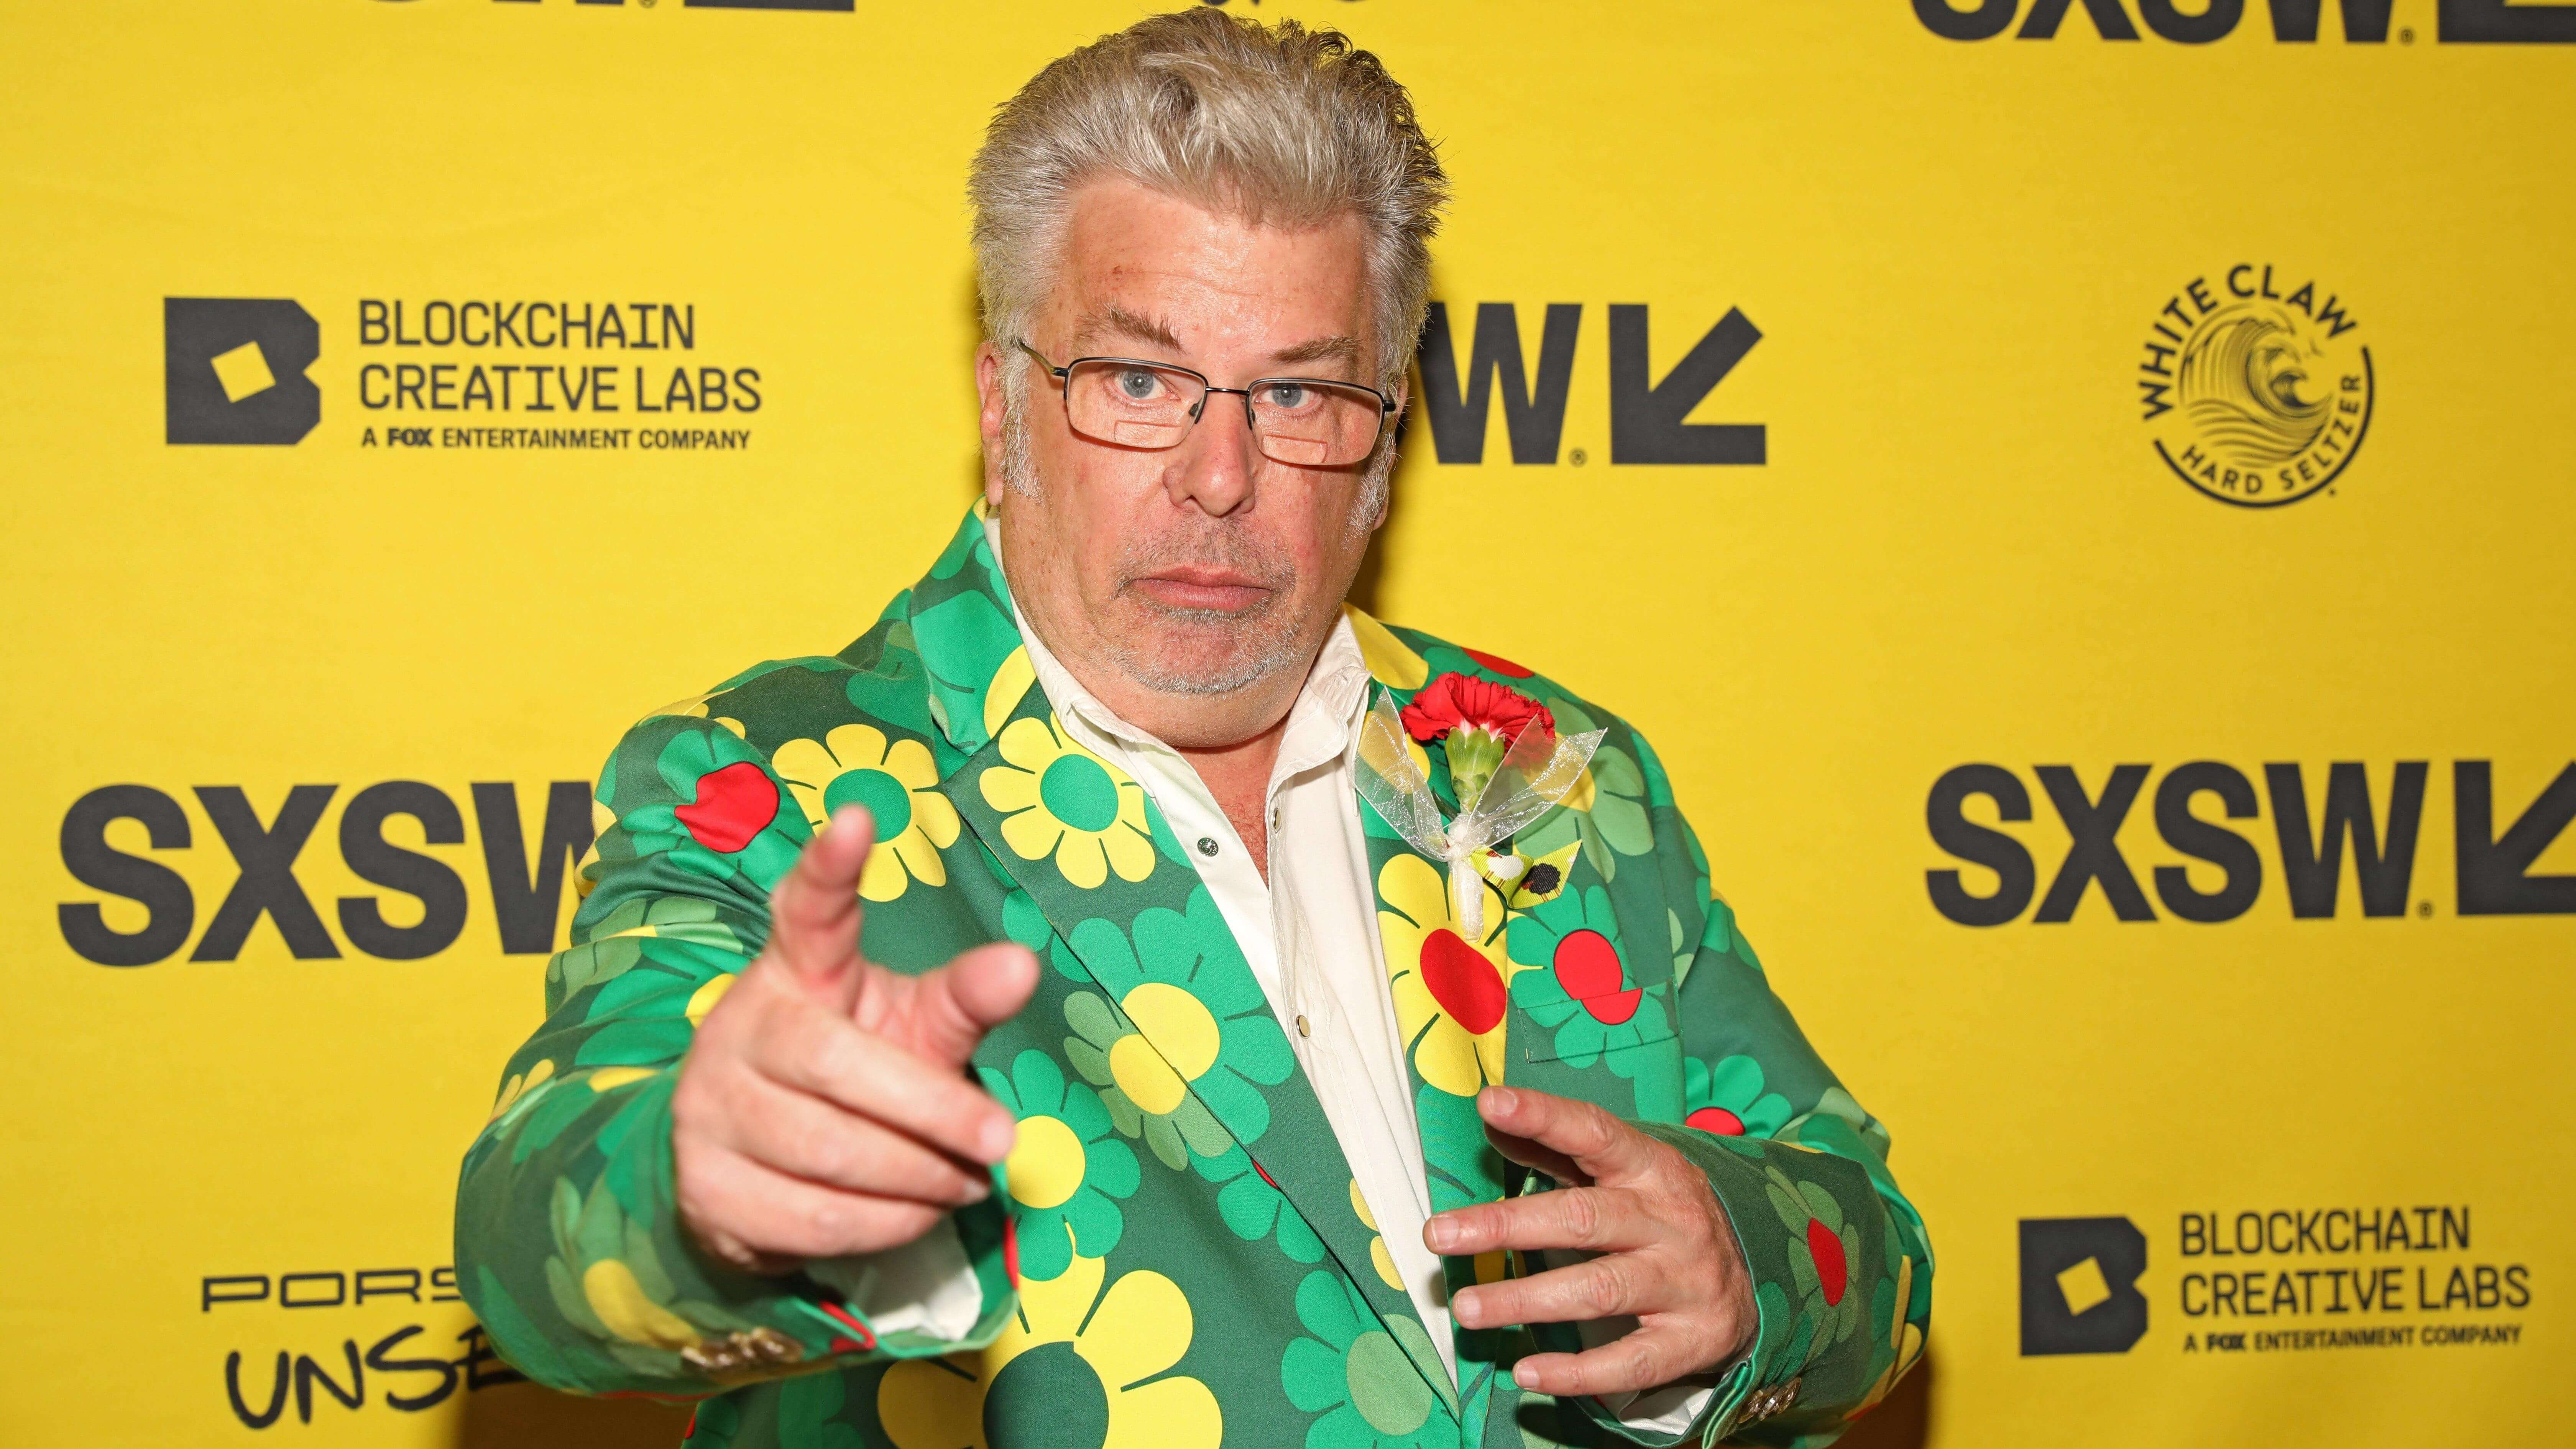 R.I.P. Mojo Nixon, “Elvis Is Everywhere” singer and psychobilly artist